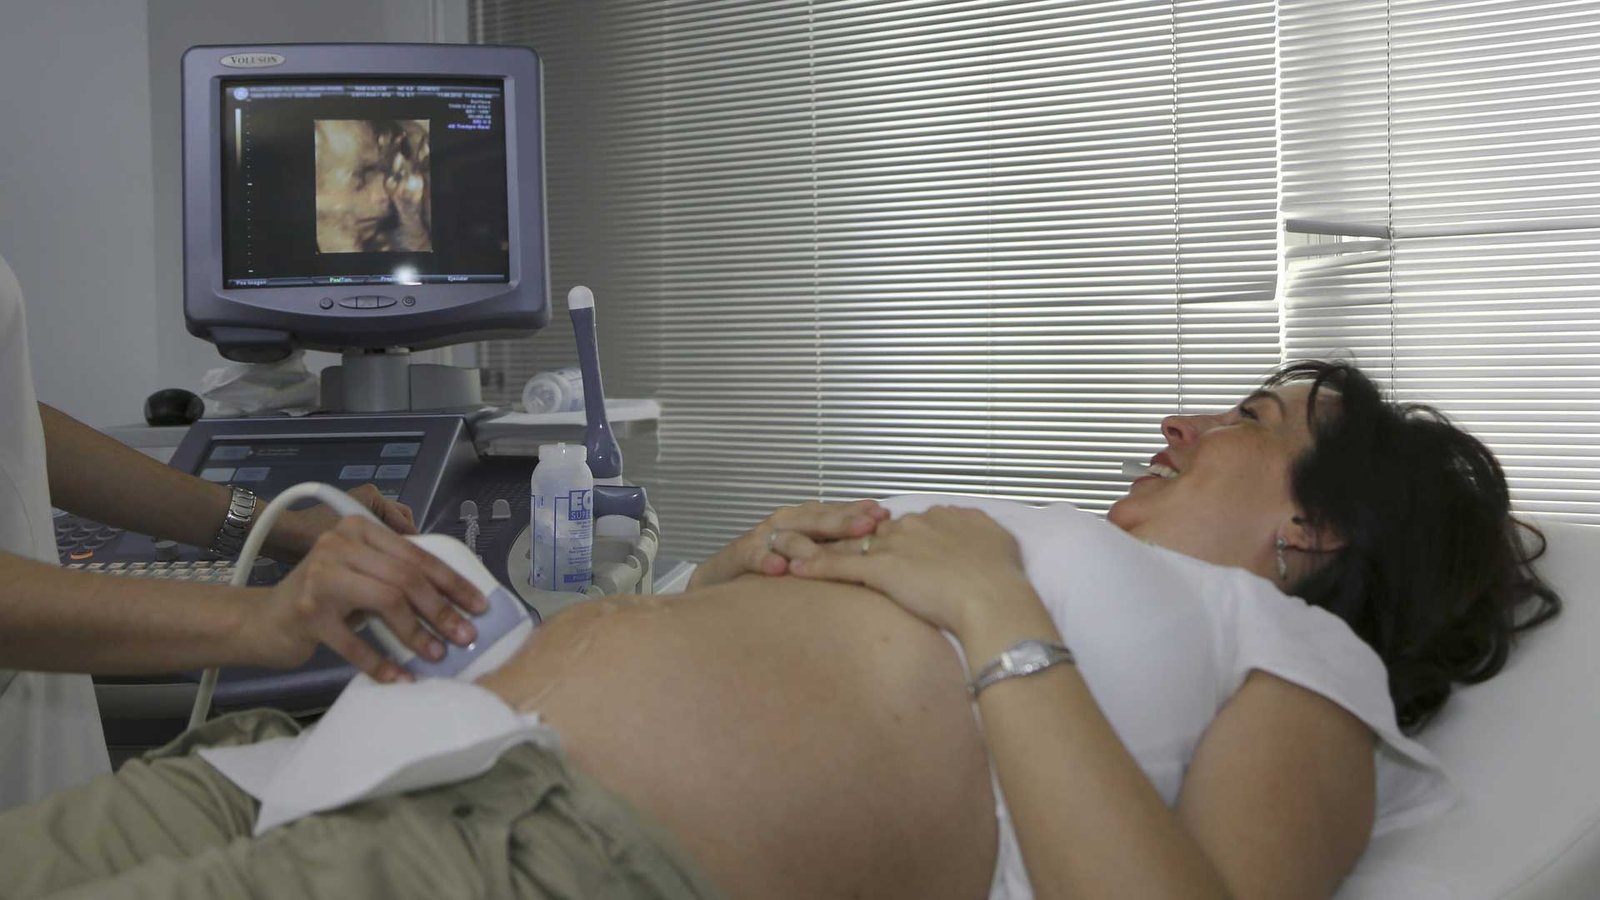 Key Trends That Are Shaping the Ultrasound Industry